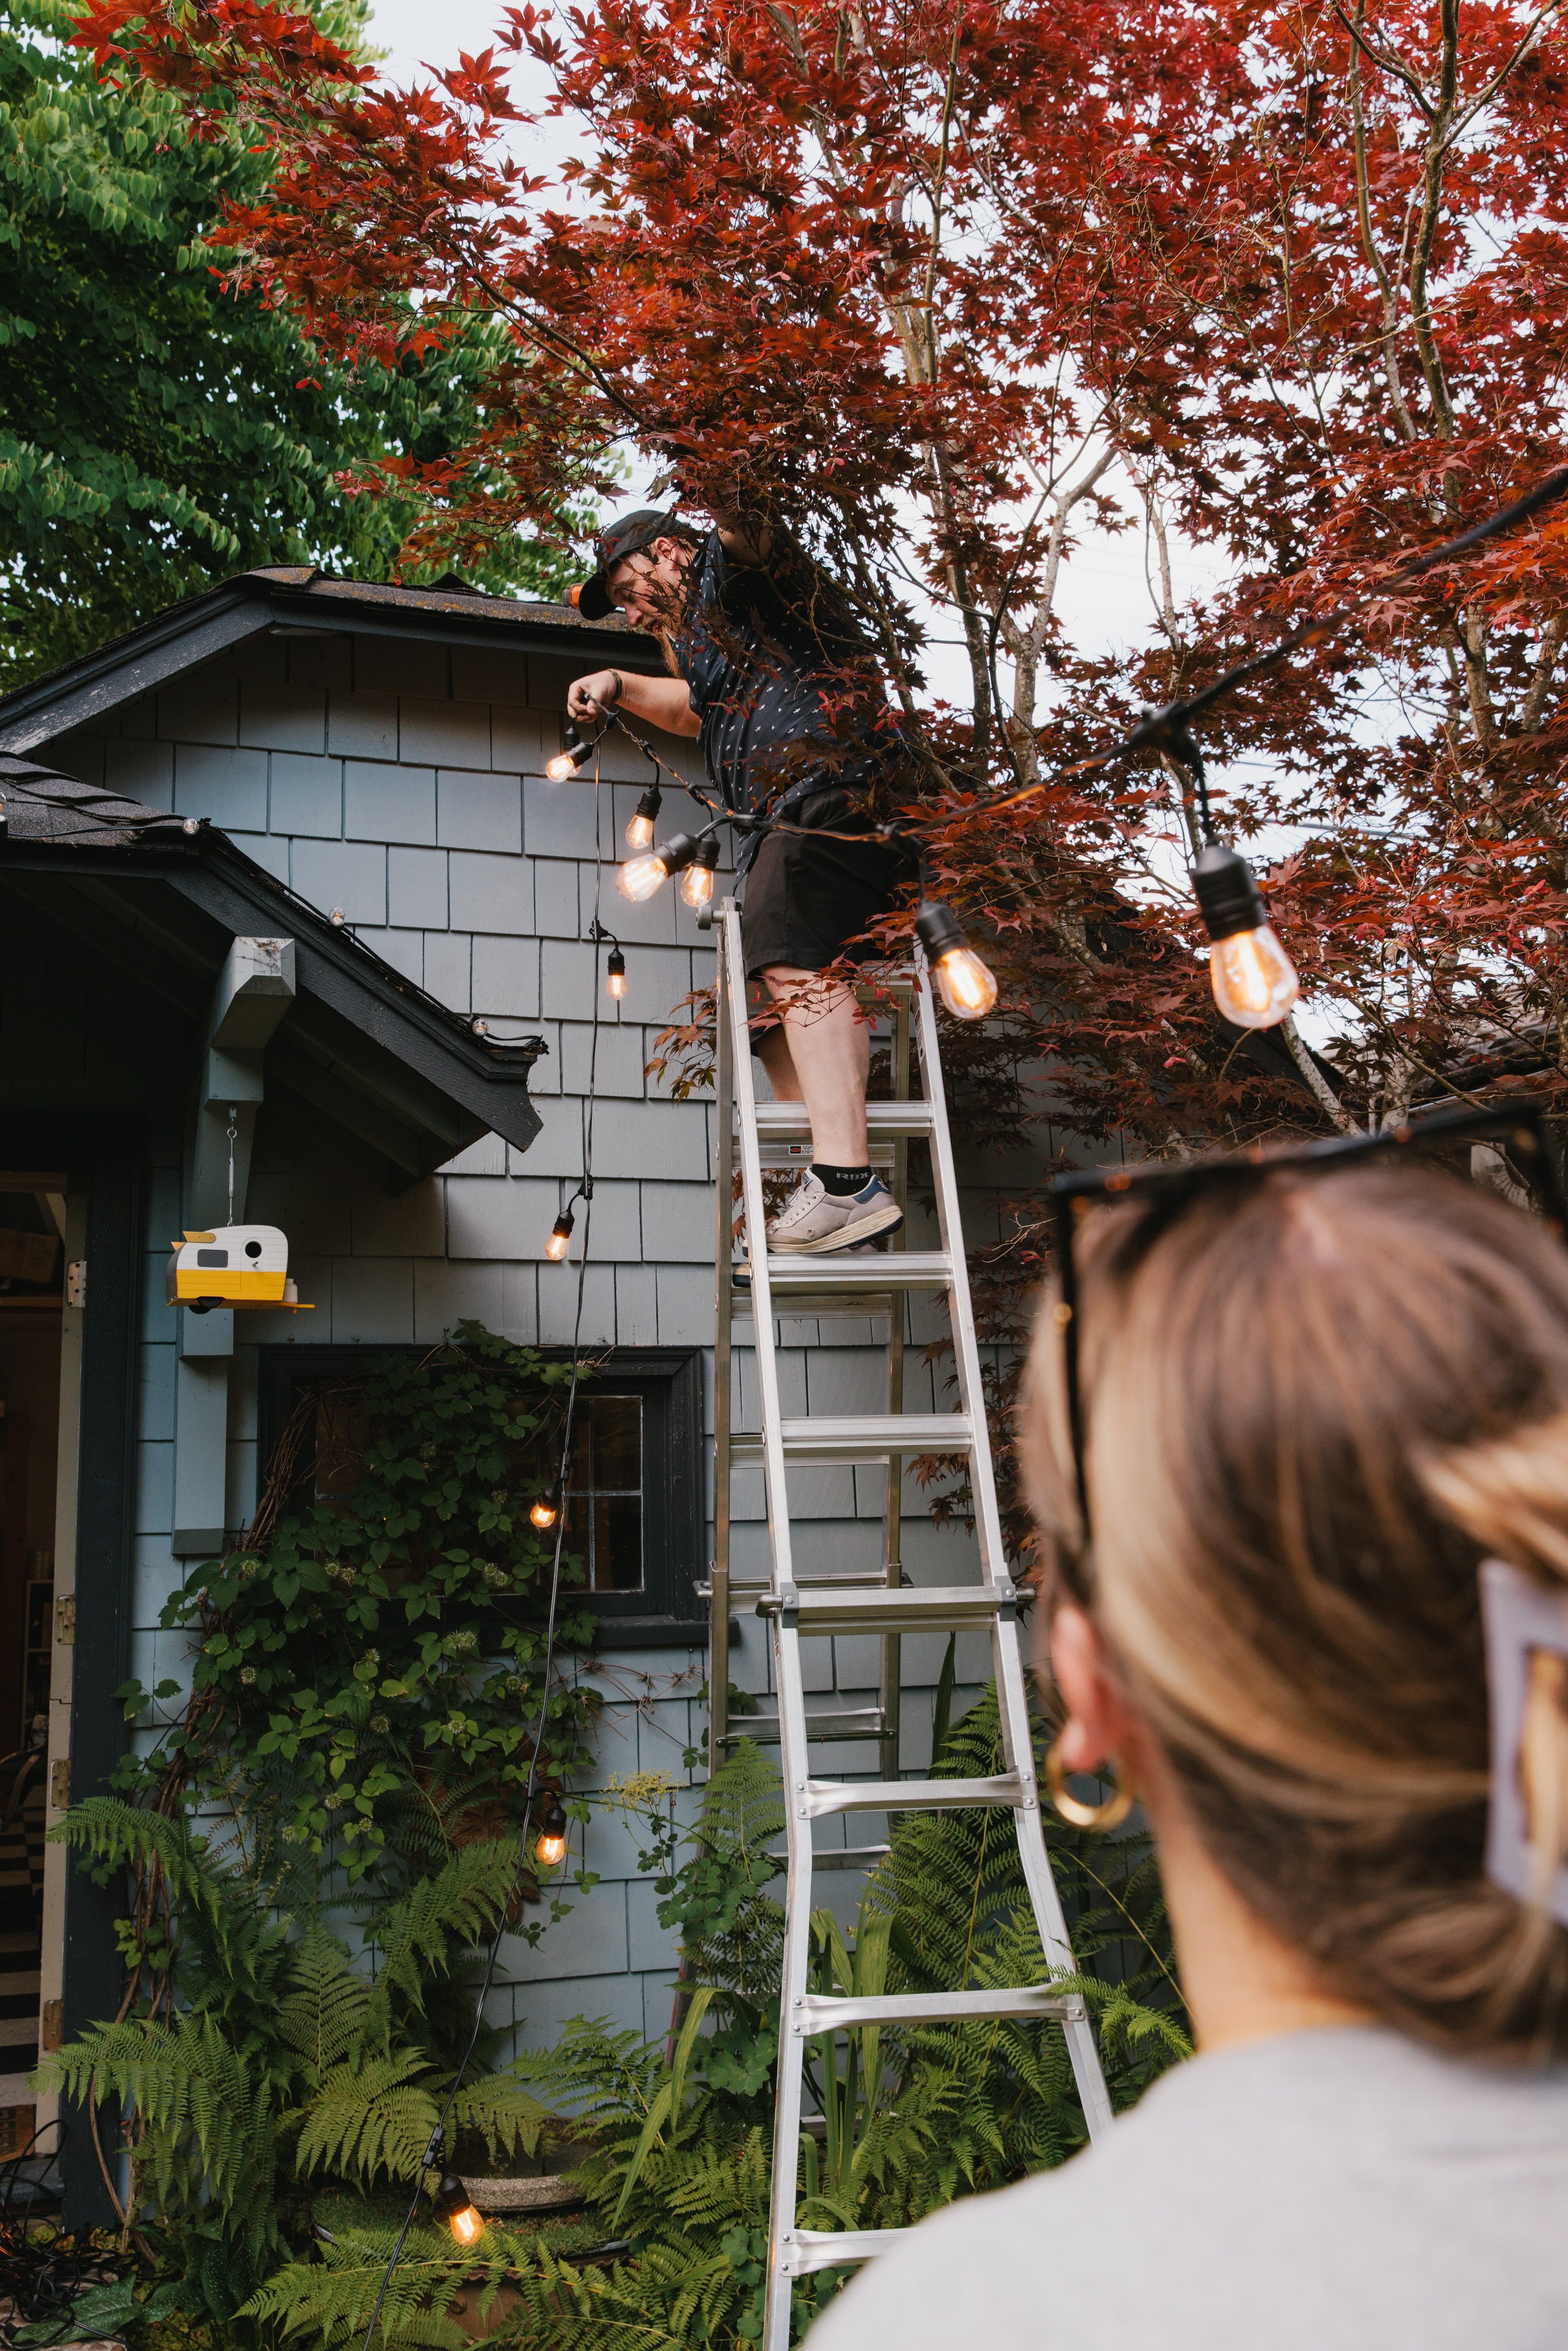 Patio lighting being installed by a custom lighting installer on tall ladder.